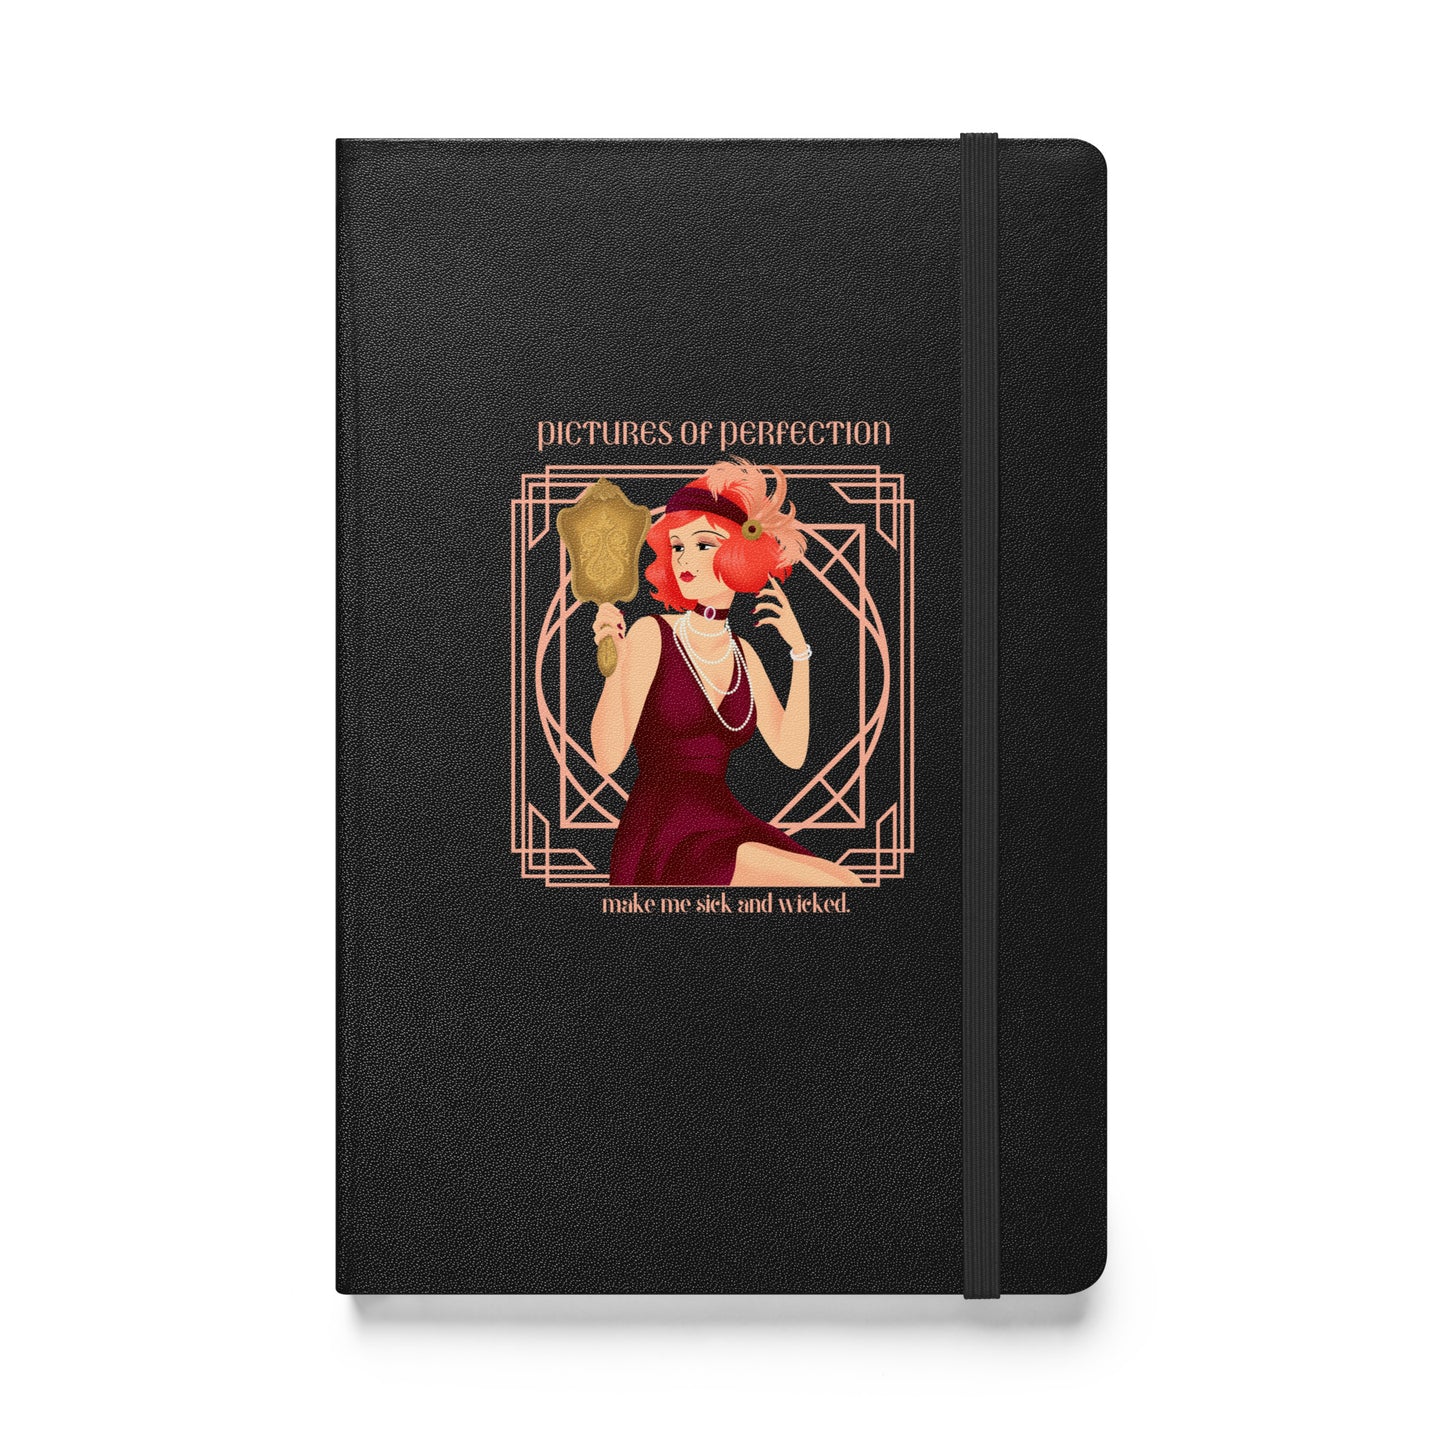 Art Deco - Perfection Hardcover bound notebook